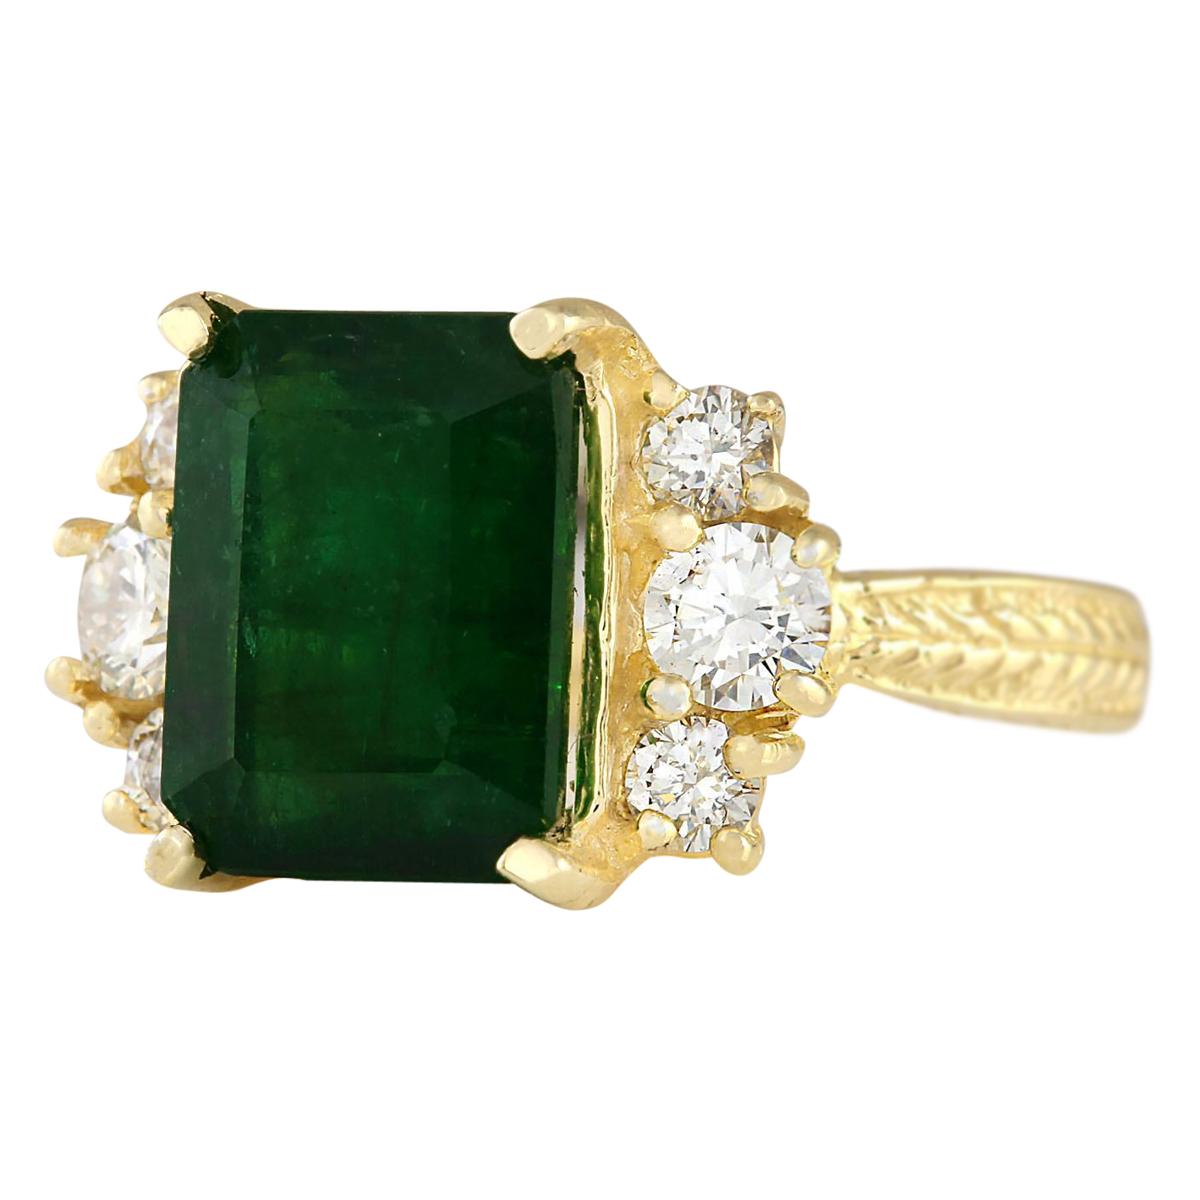 Stamped: 14K Yellow Gold
Total Ring Weight: 6.6 Grams
Emerald Weight is 4.55 Carat (Measures: 11.00x9.00 mm)
Diamond Weight is 0.60 Carat
Color: F-G, Clarity: VS2-SI1
Face Measures: 11.00x16.40 mm
Sku: [703952W]